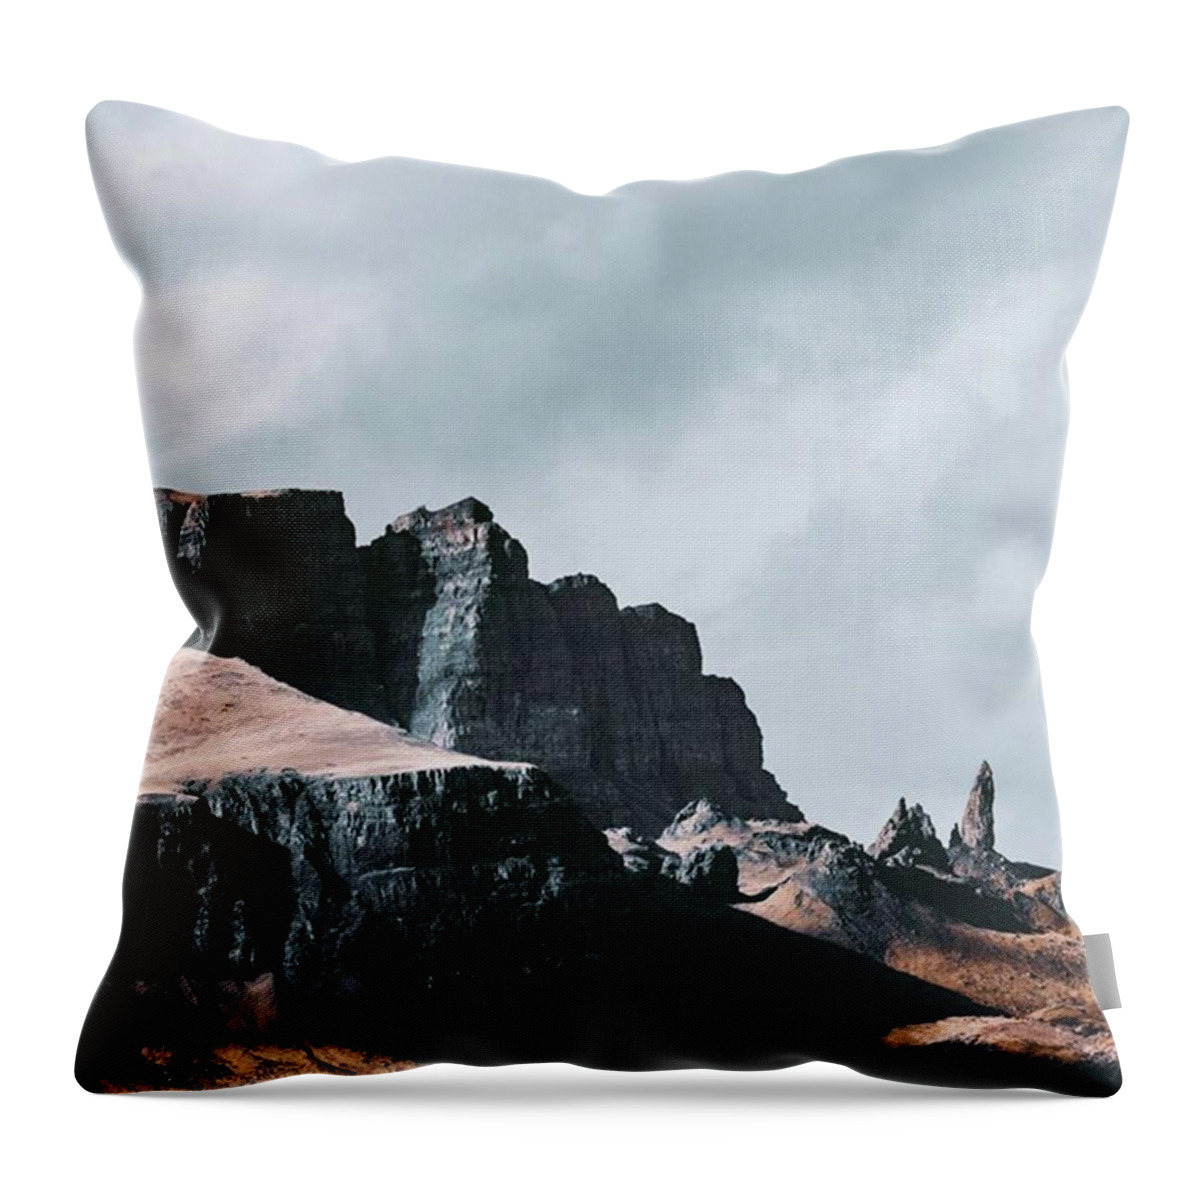 Hstakeover Throw Pillow featuring the photograph Welcome To The Surface Of Planet by Dan Cook